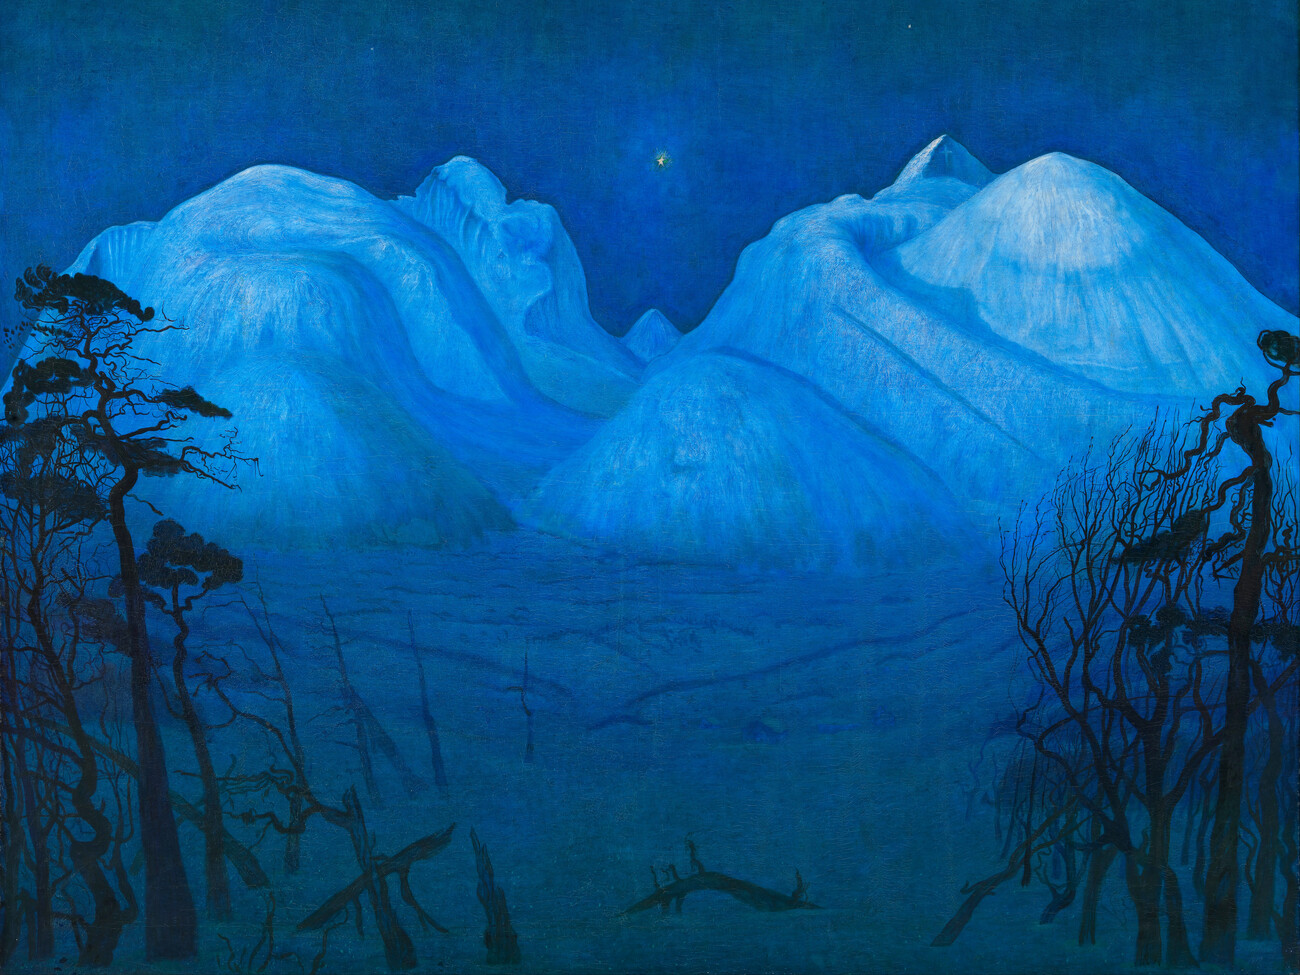 Illustration Winter Night in the Mountains (Festive / Christmas / Magical / Celestial Landscape) - Harald Sohlberg